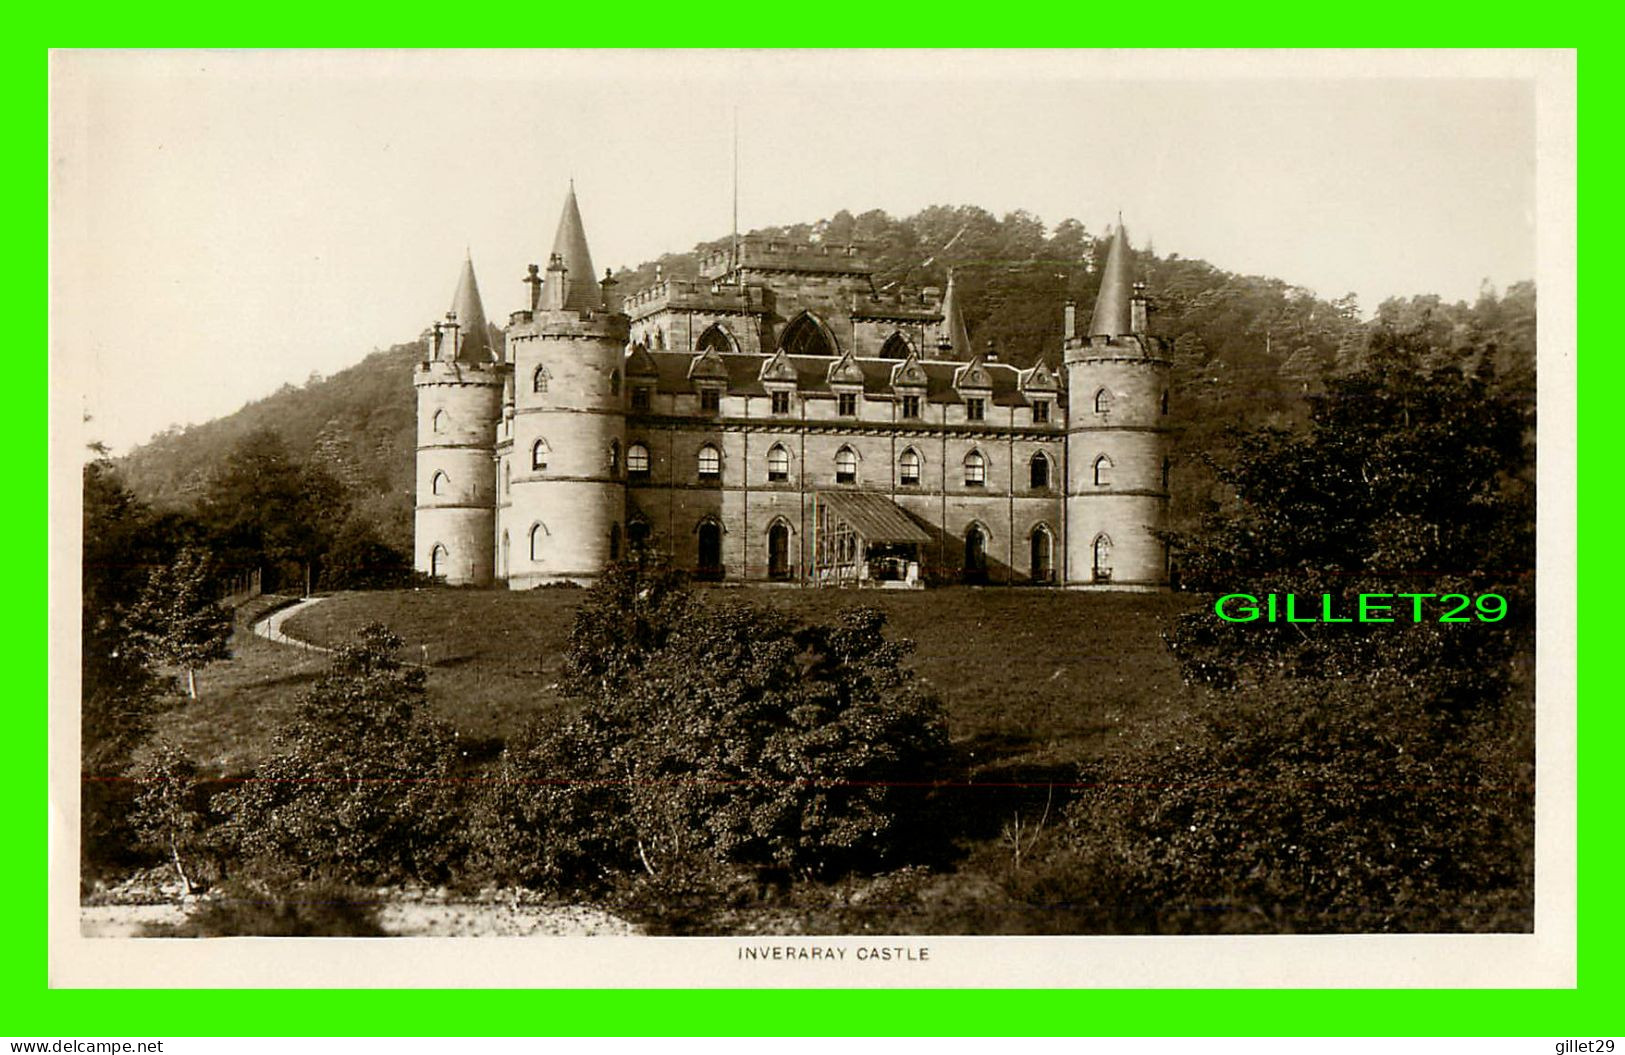 INVERARAY, SCOTLAND - VIEW OF THE CATLE - HOLME'S REAL PHOTO SERIES - REAL PHOTOGRAPH - - Argyllshire